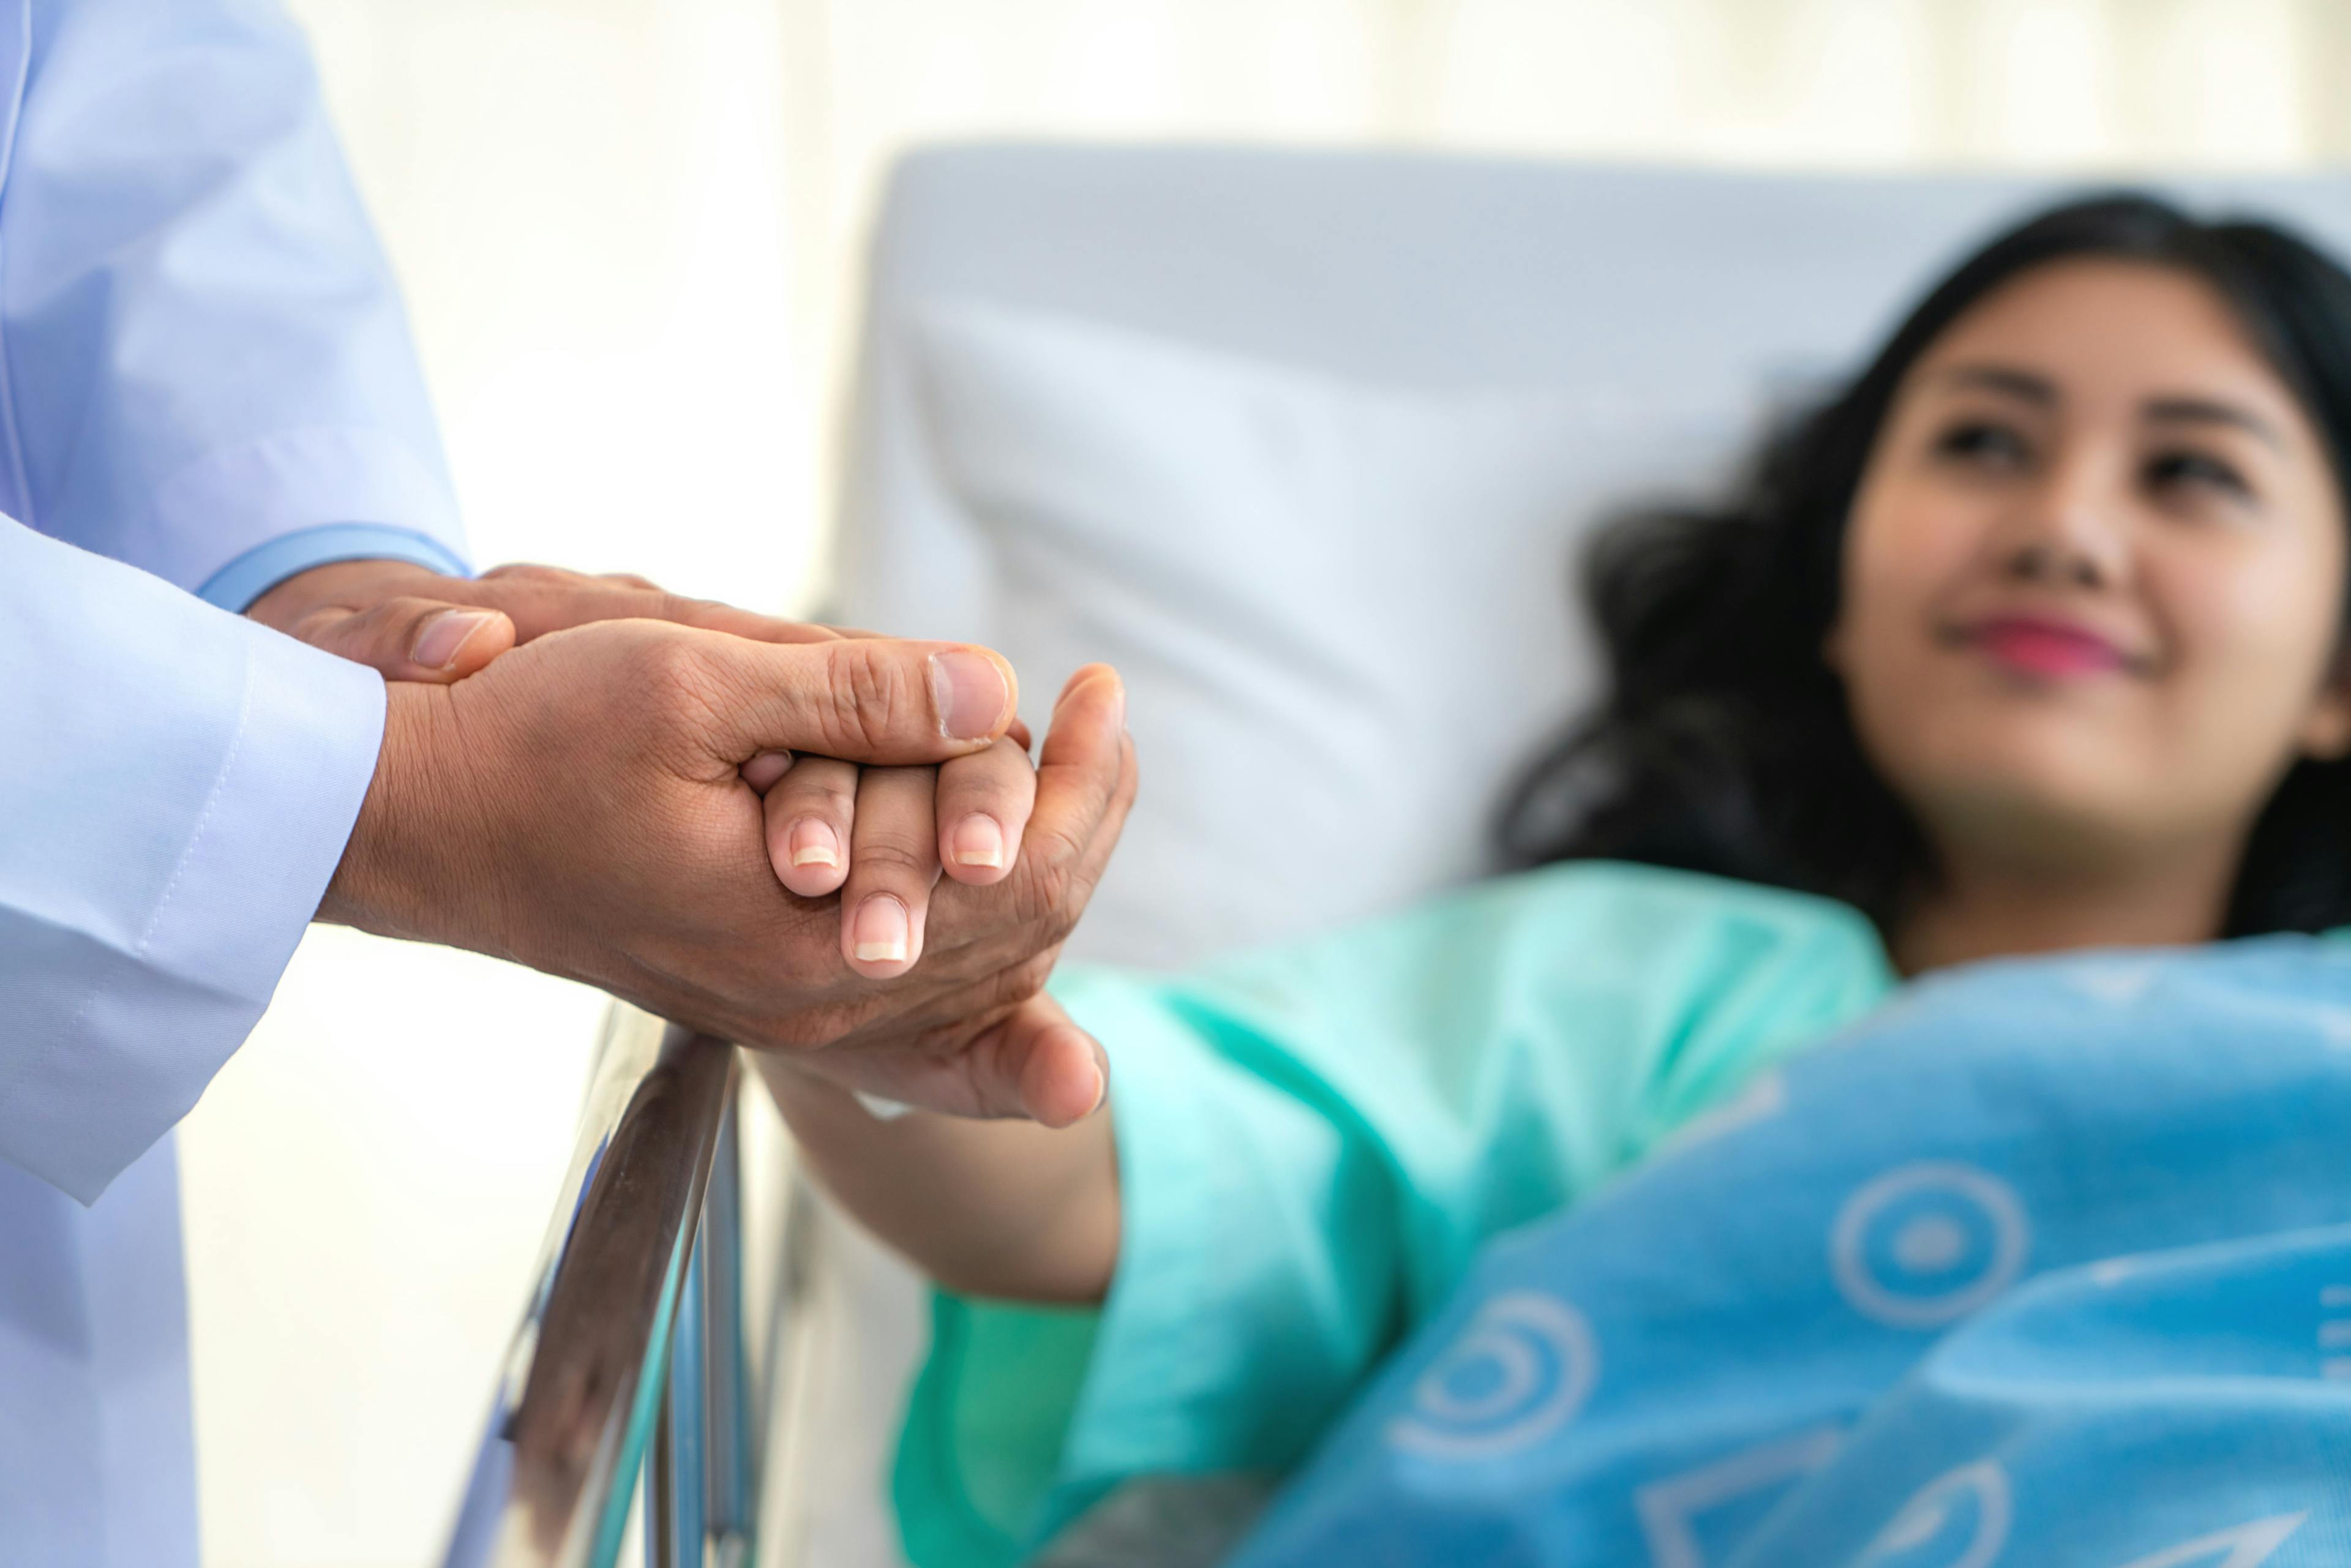 These hospitals received high marks for consumer loyalty and patient experience